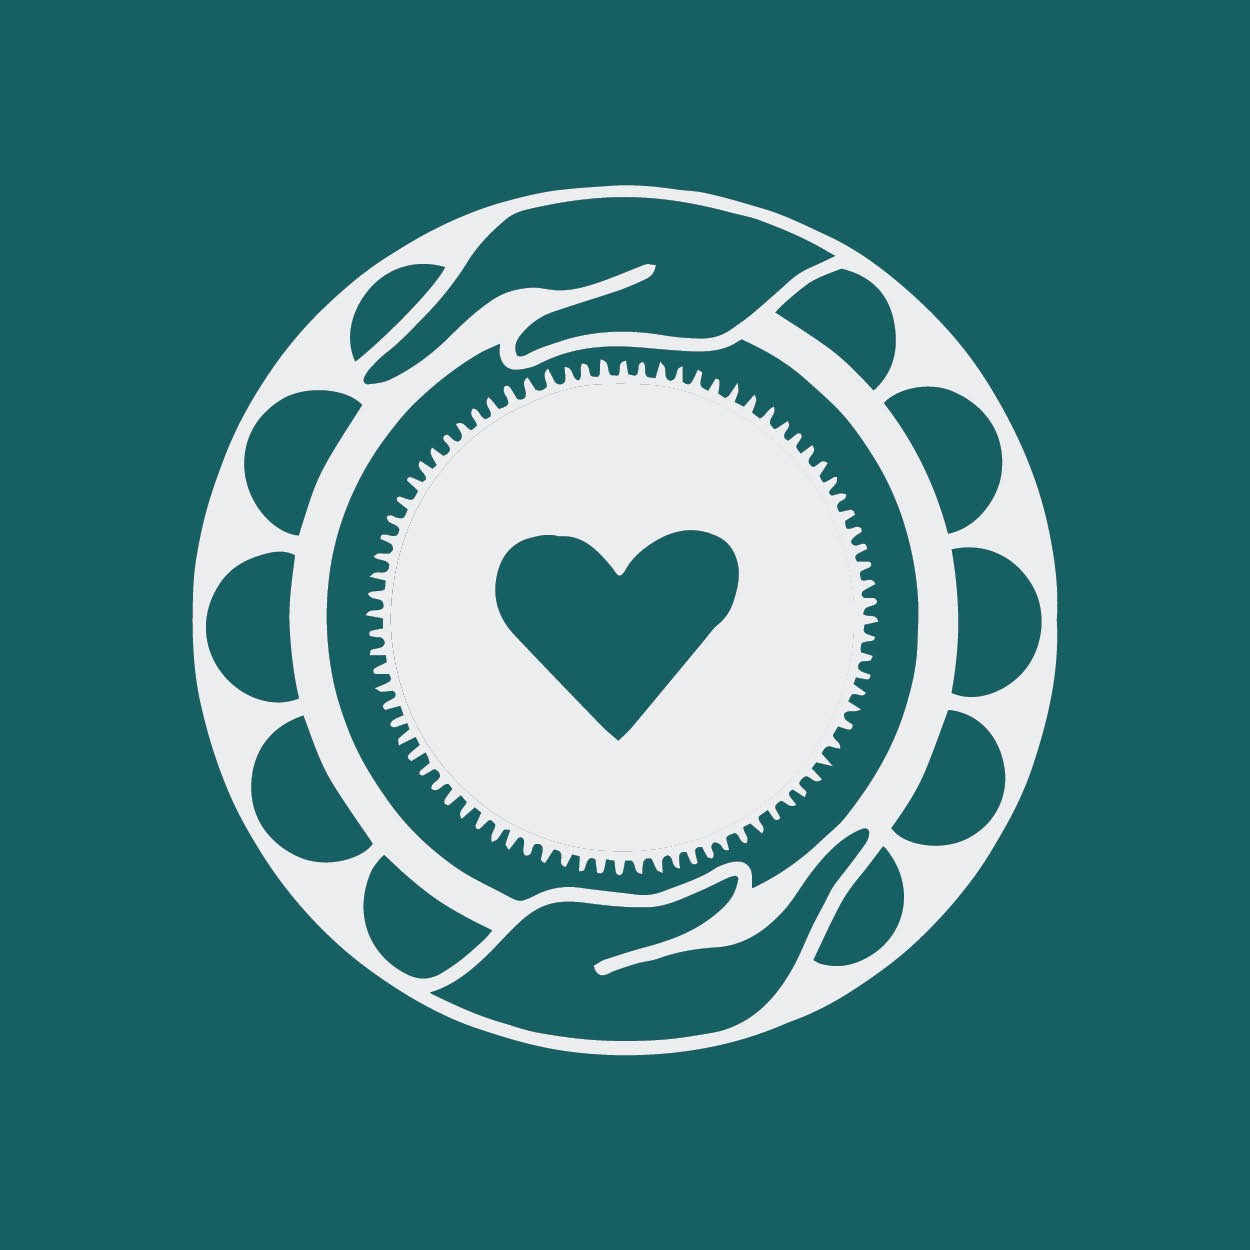 Icon designed by Sandeep Johal: Hands around a circle with a heart in the middle